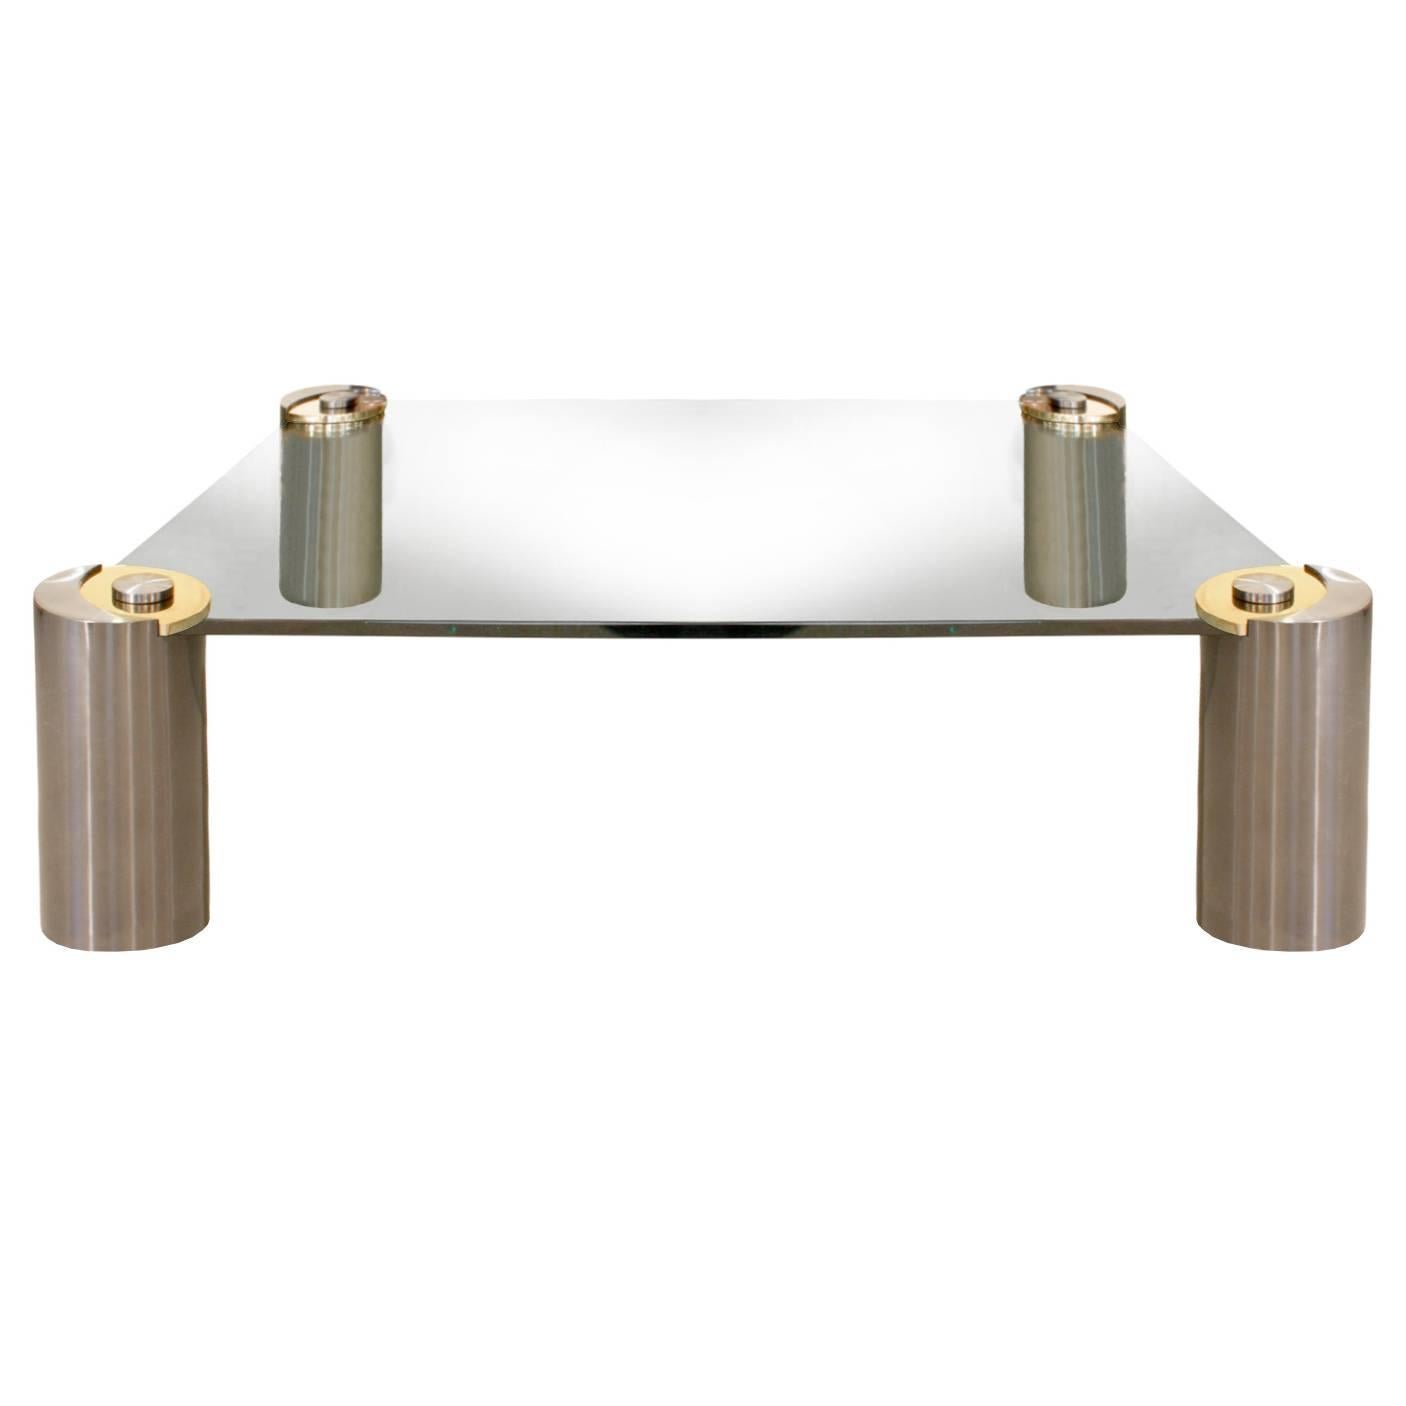 Karl Springer Large "Sculpture Leg Coffee Table" in Gunmetal and Brass, 1980s